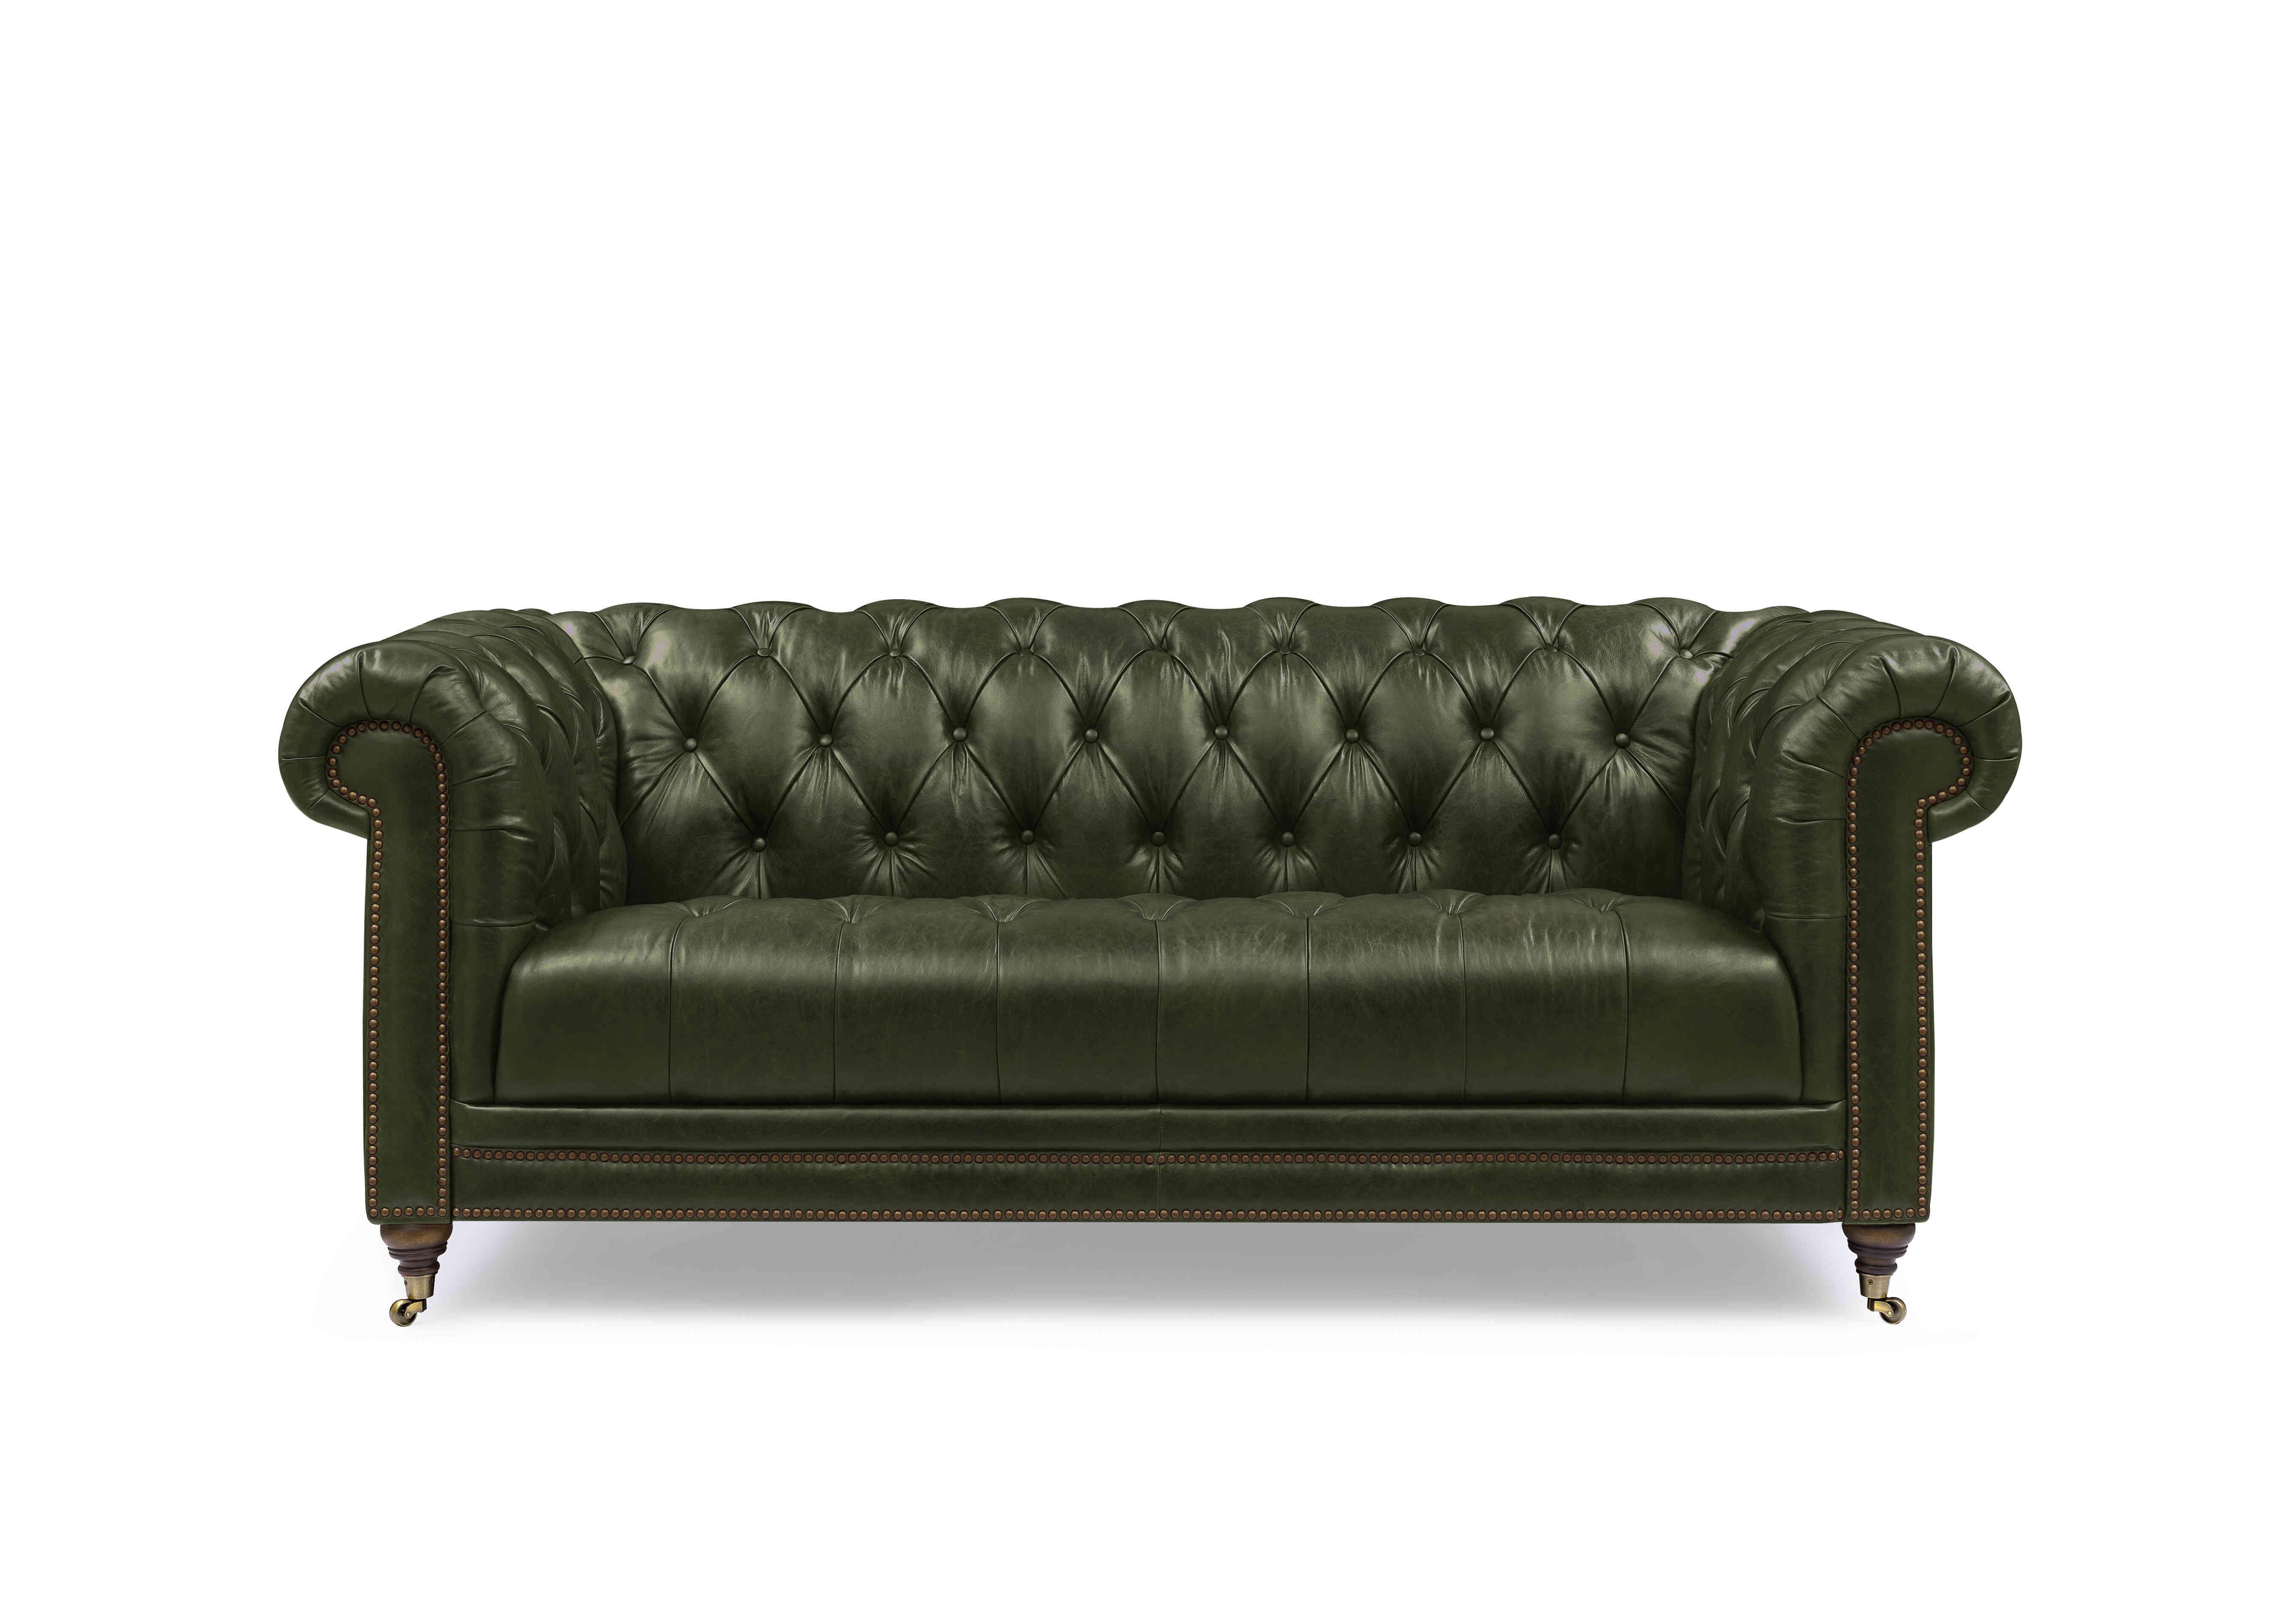 Walter 3 Seater Leather Chesterfield Sofa in X3y1-1965ls Emerald on Furniture Village